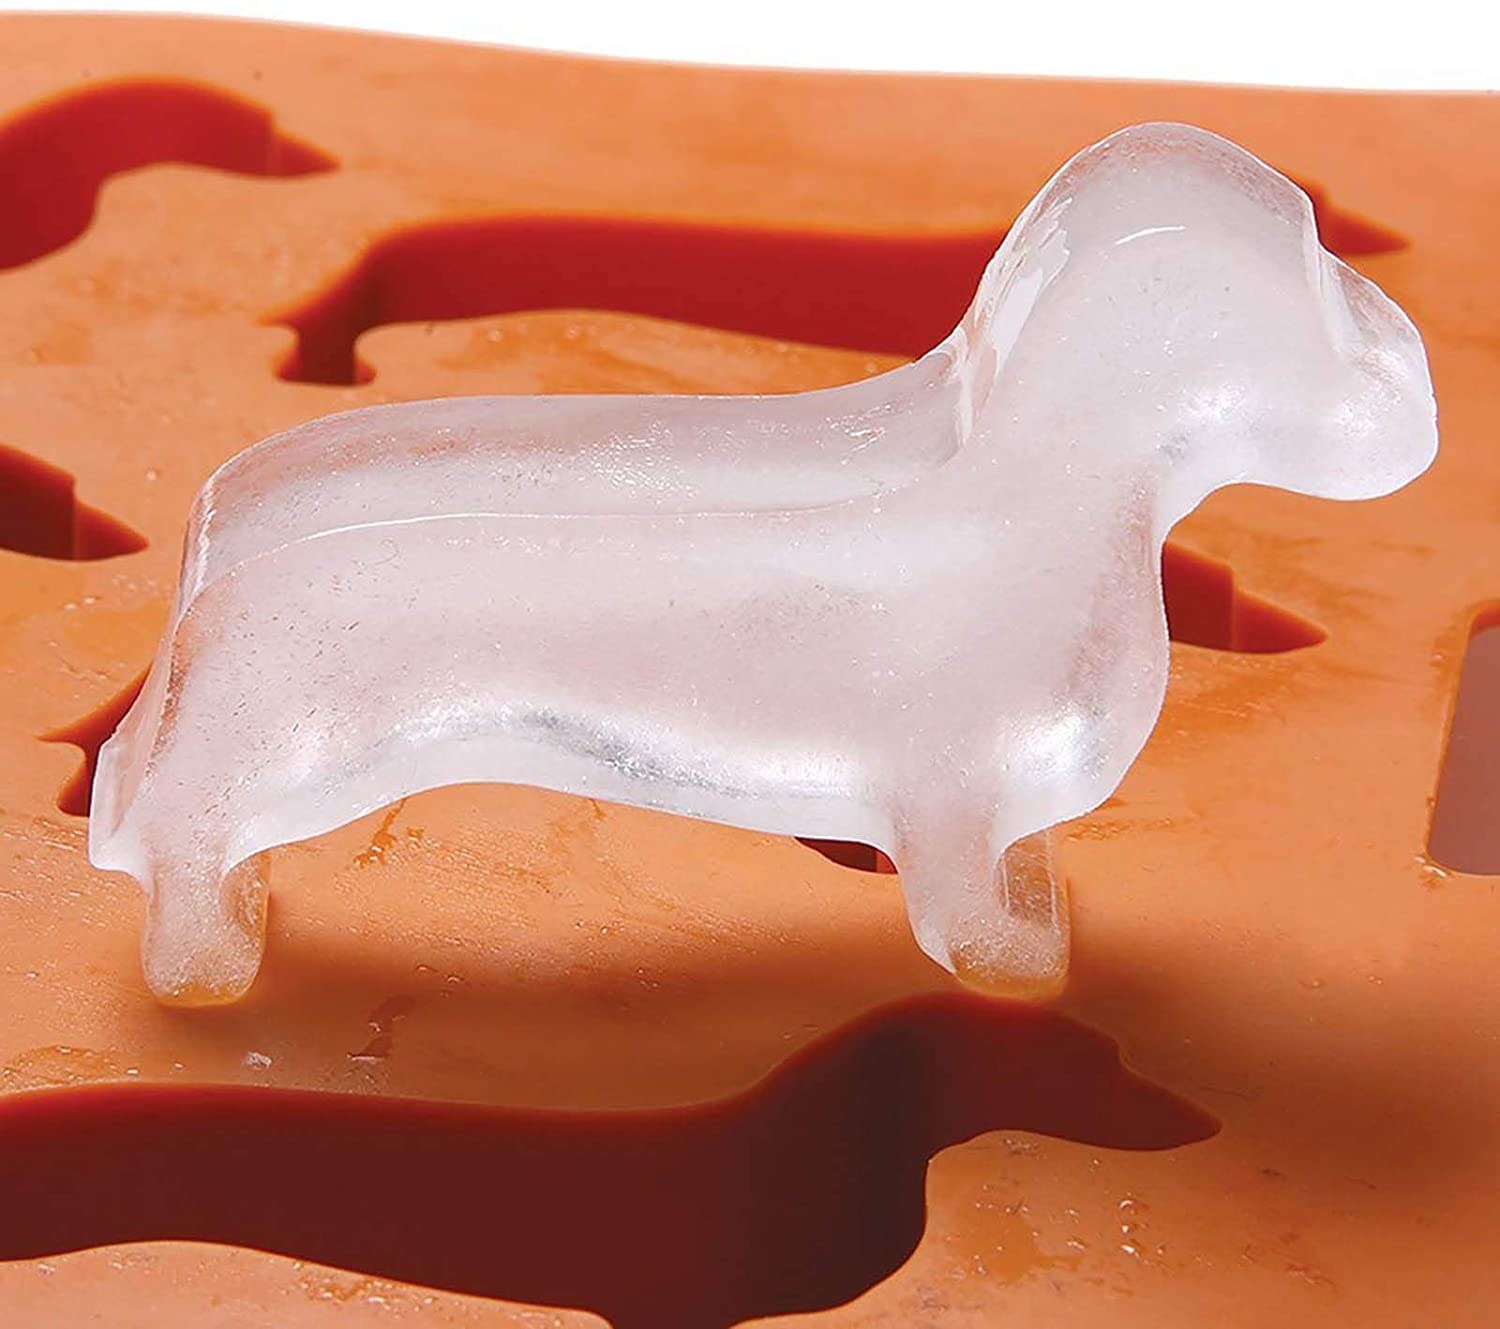 The ice cube tray with one dachshund-shaped ice cube standing on it